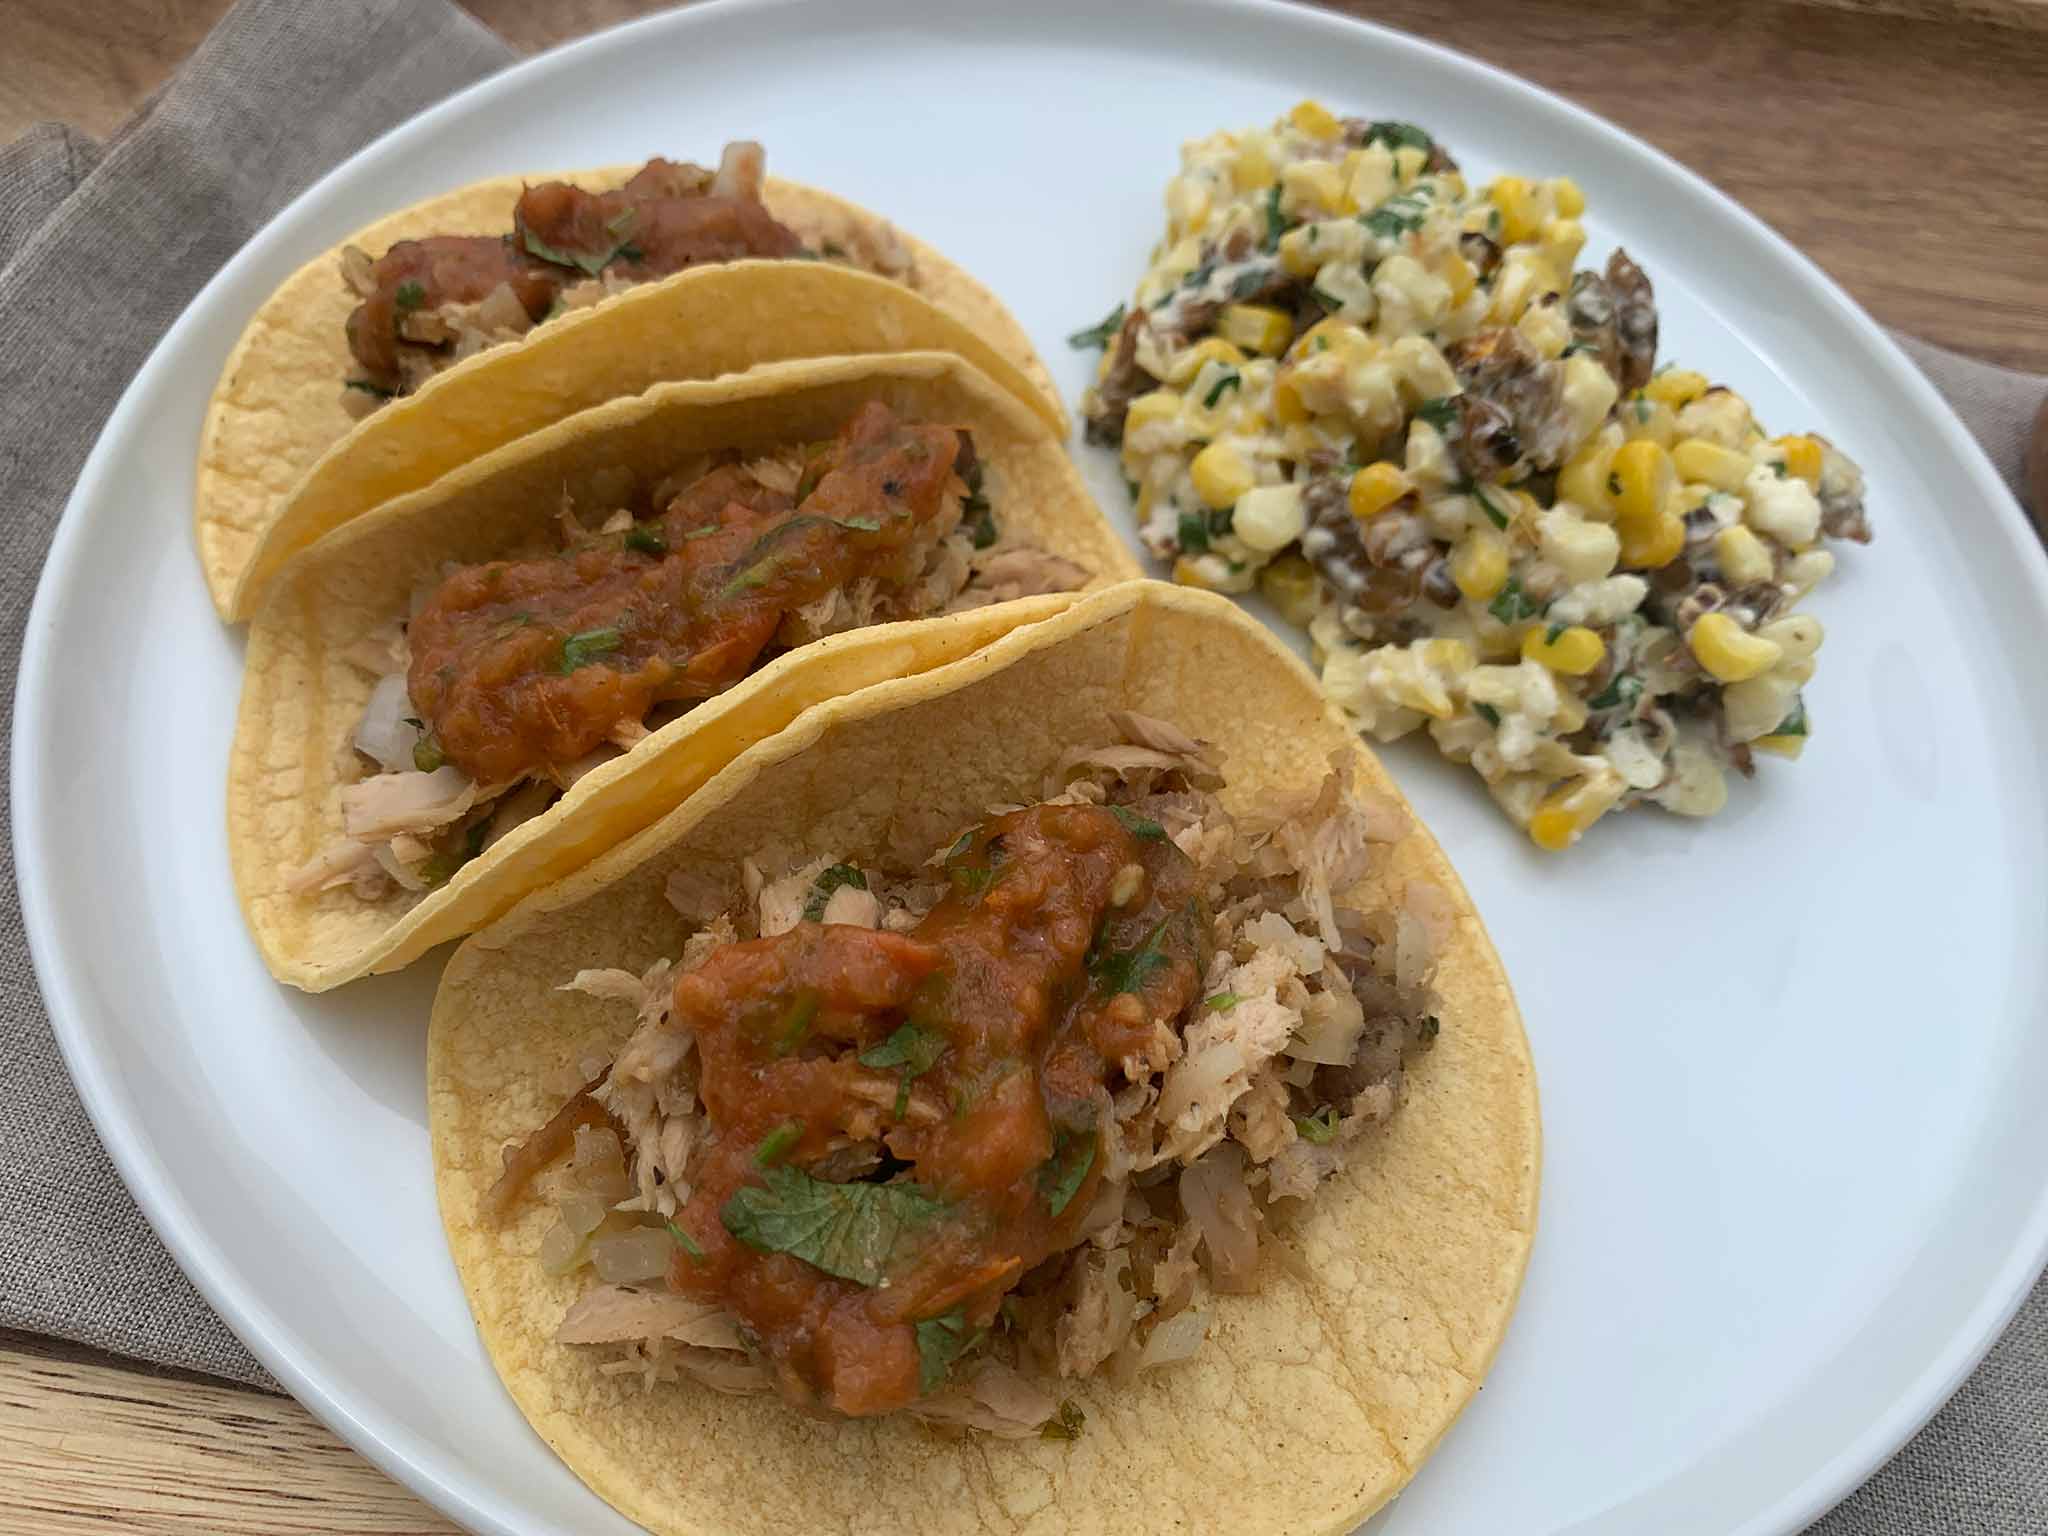 Tuna & Potato Street Tacos with Anchovy Roasted Salsa and Mexican Street Corn